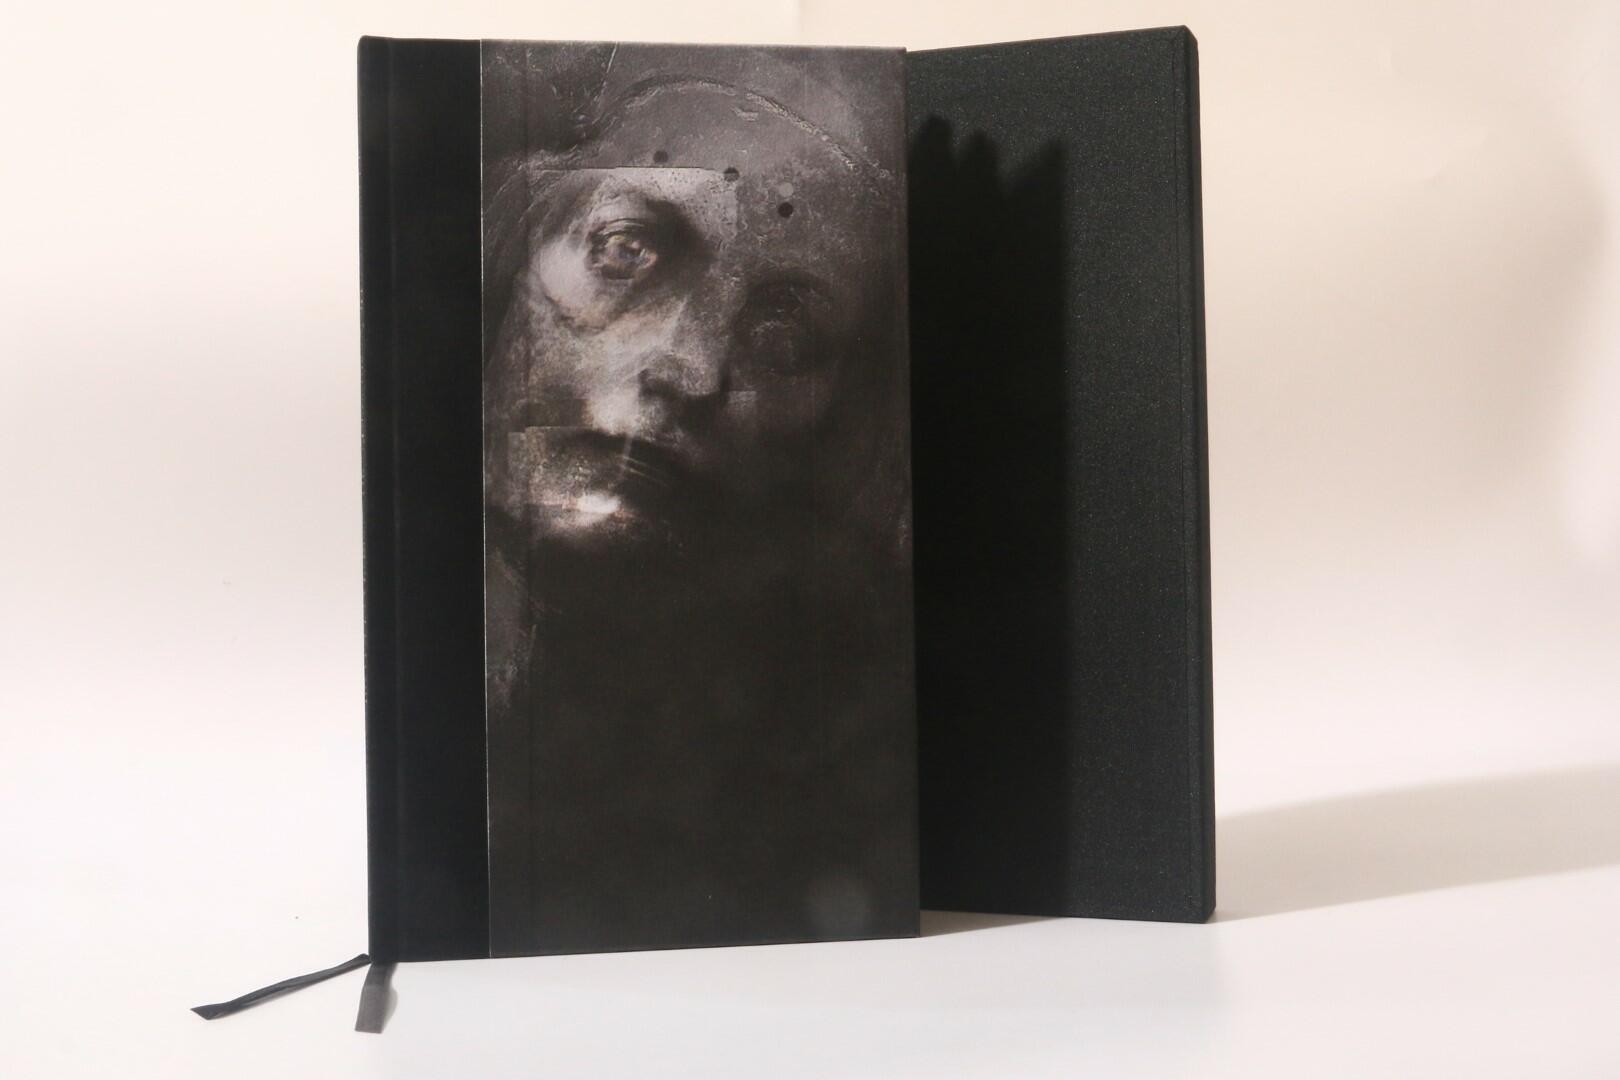 Thomas Ligotti - The Agonizing Resurrection of Victor Frankenstein & Other Gothic Tales - Centipede Press, 2011, Signed Limited Edition.